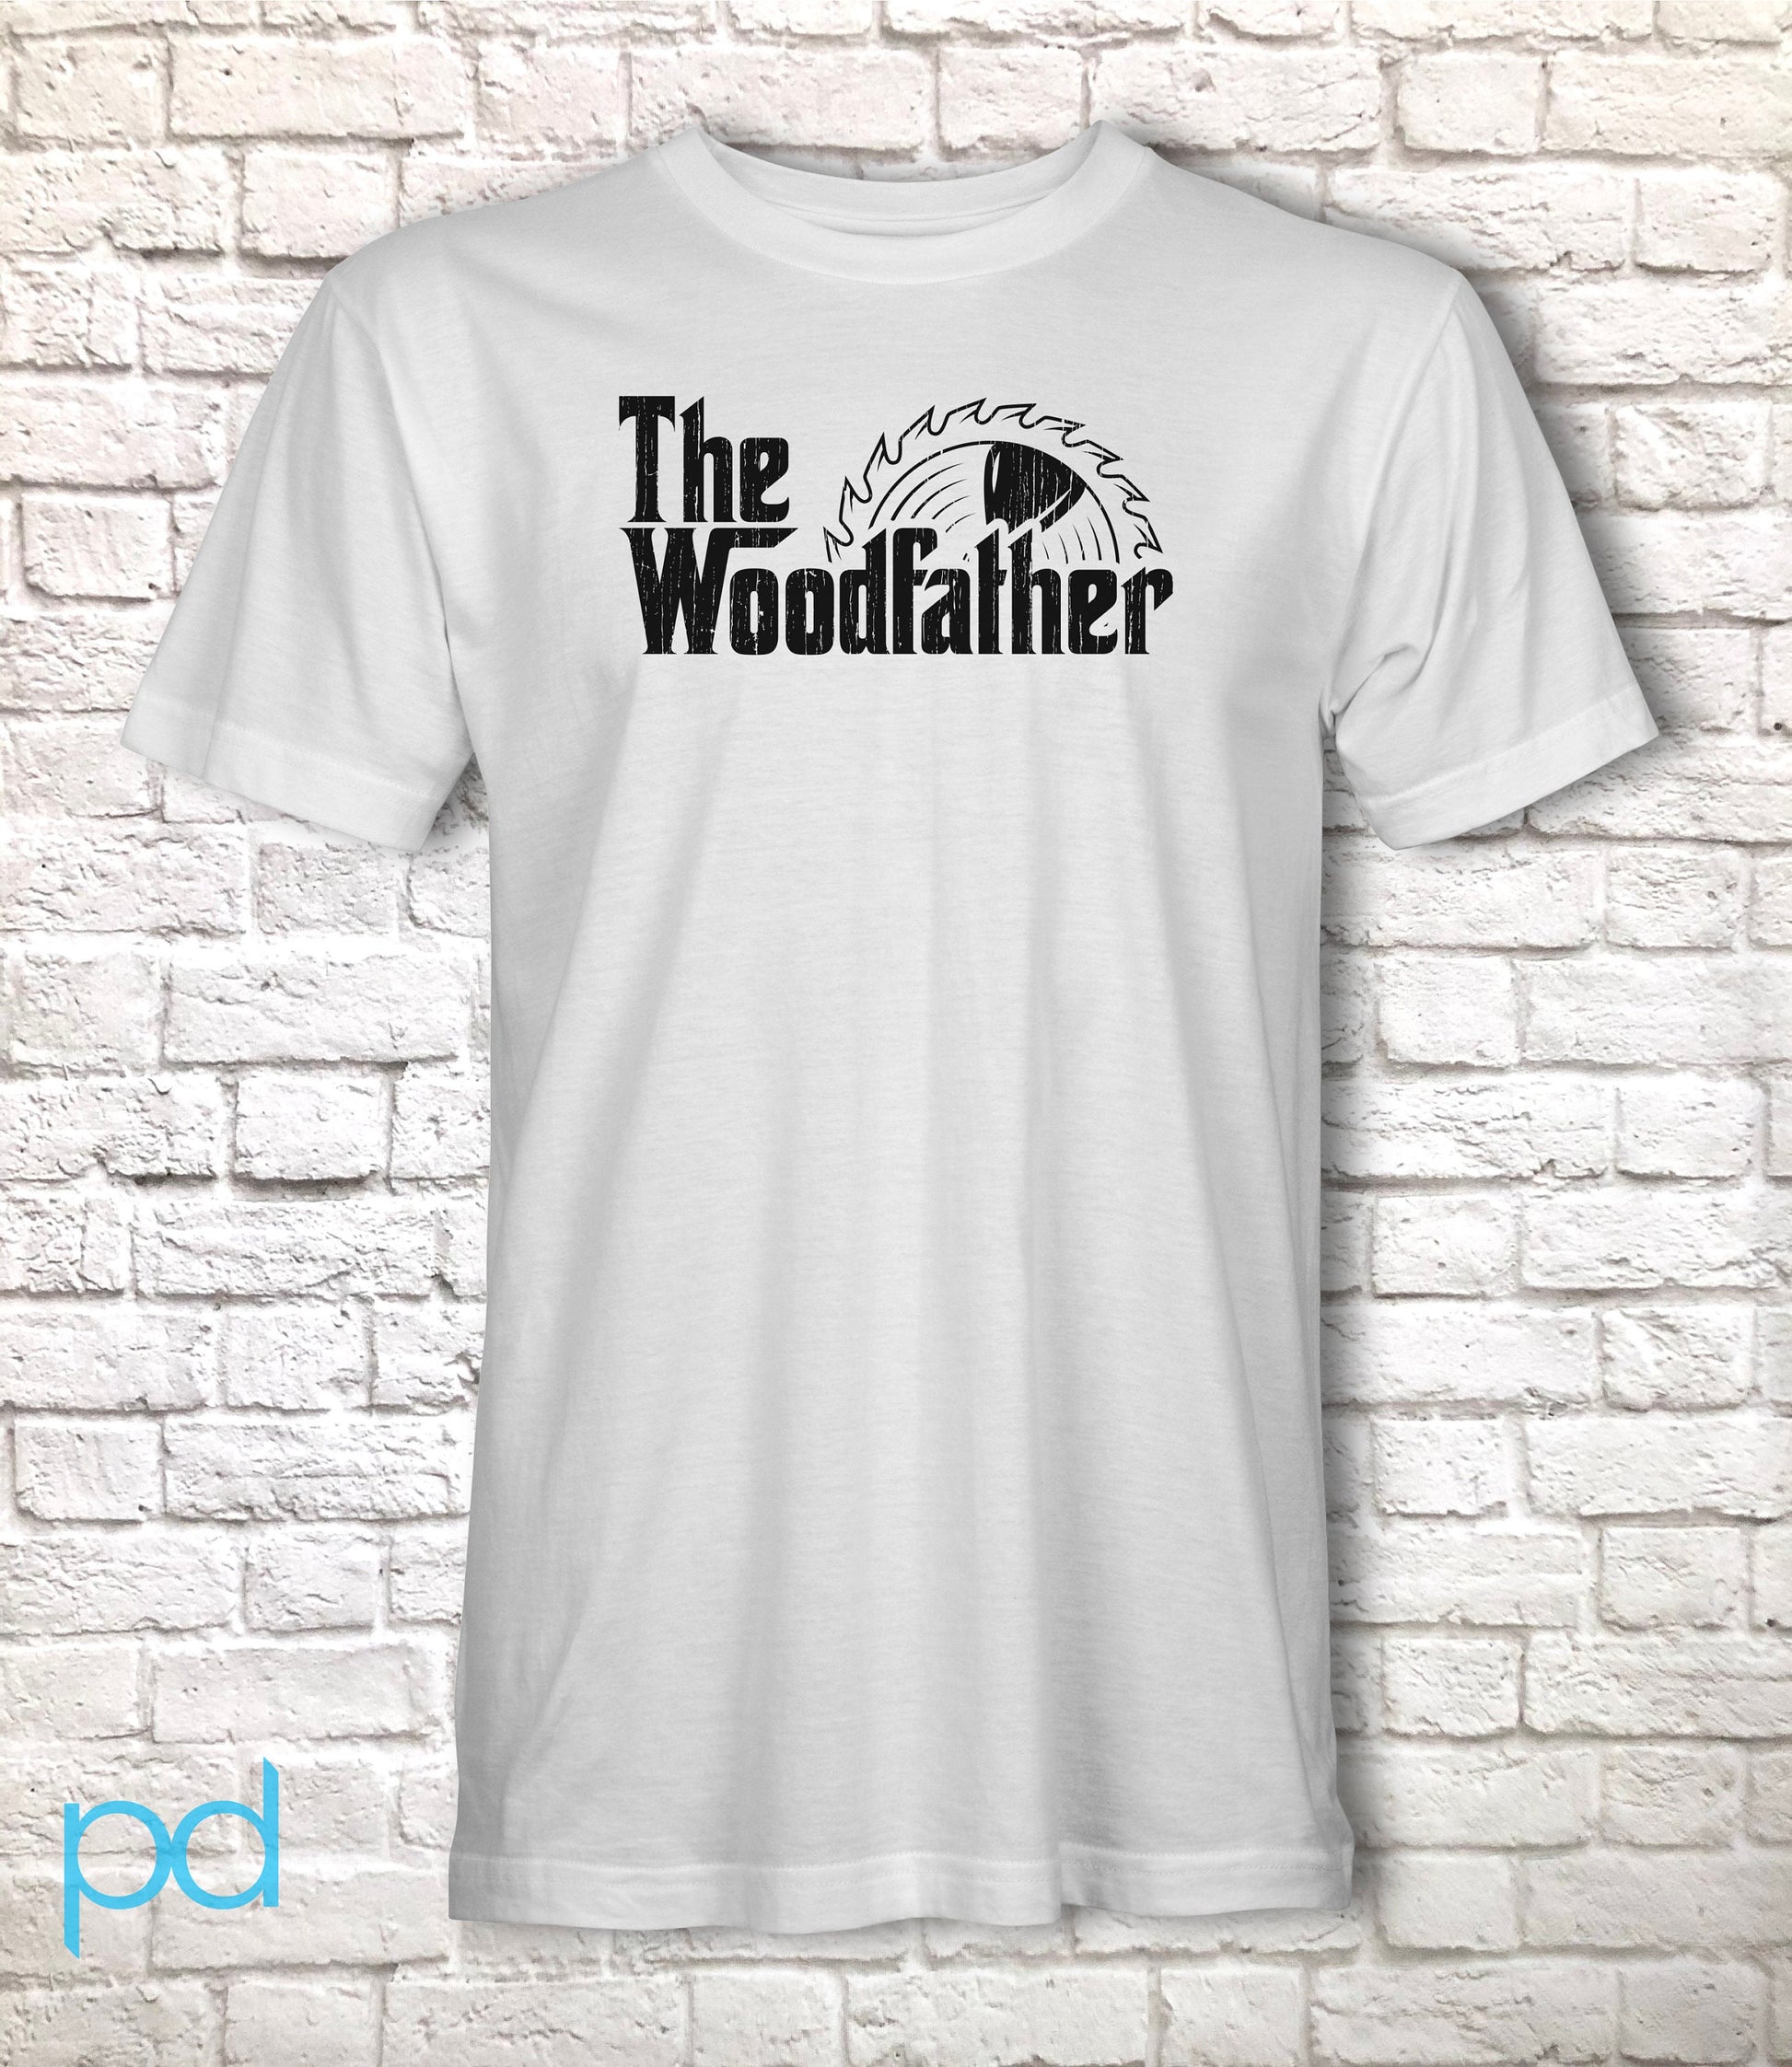 Funny Carpenter T-Shirt, Woodfather Parody Gift Idea, Humorous Woodworking Joiner Tee Shirt T Top, Circular Saw